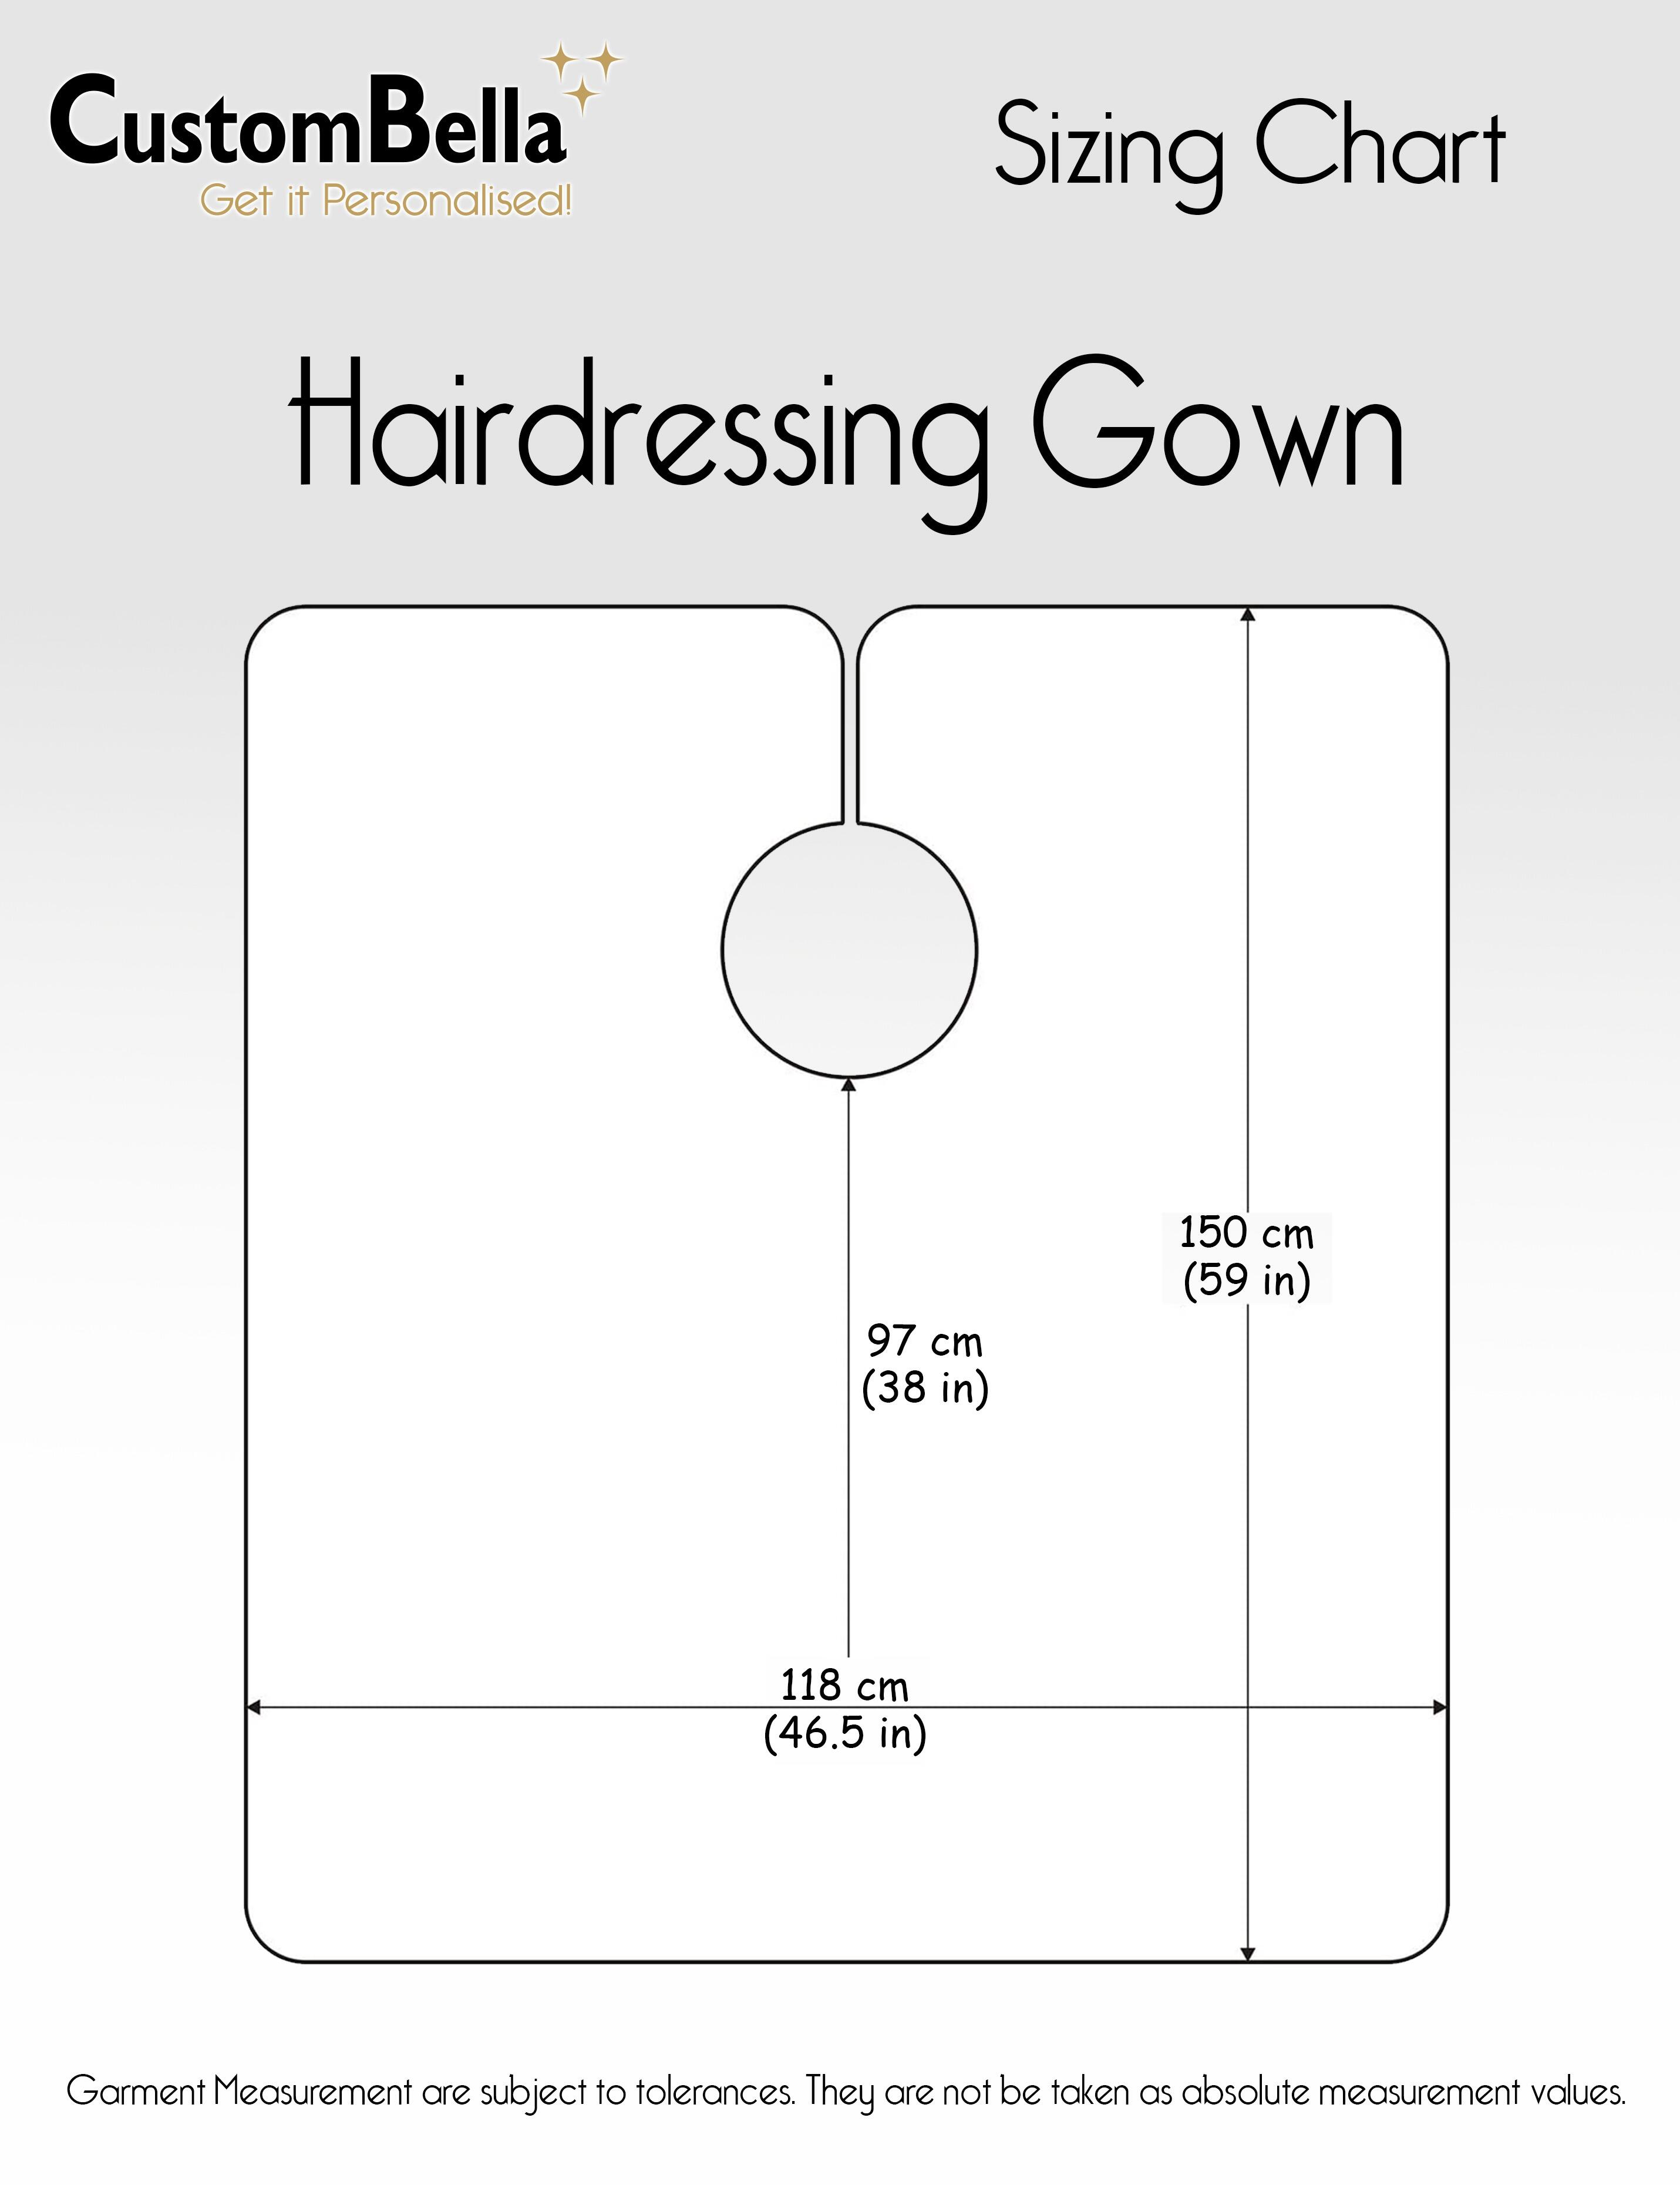 Personalised Full Colour Printed Hairdressing Gown size chart